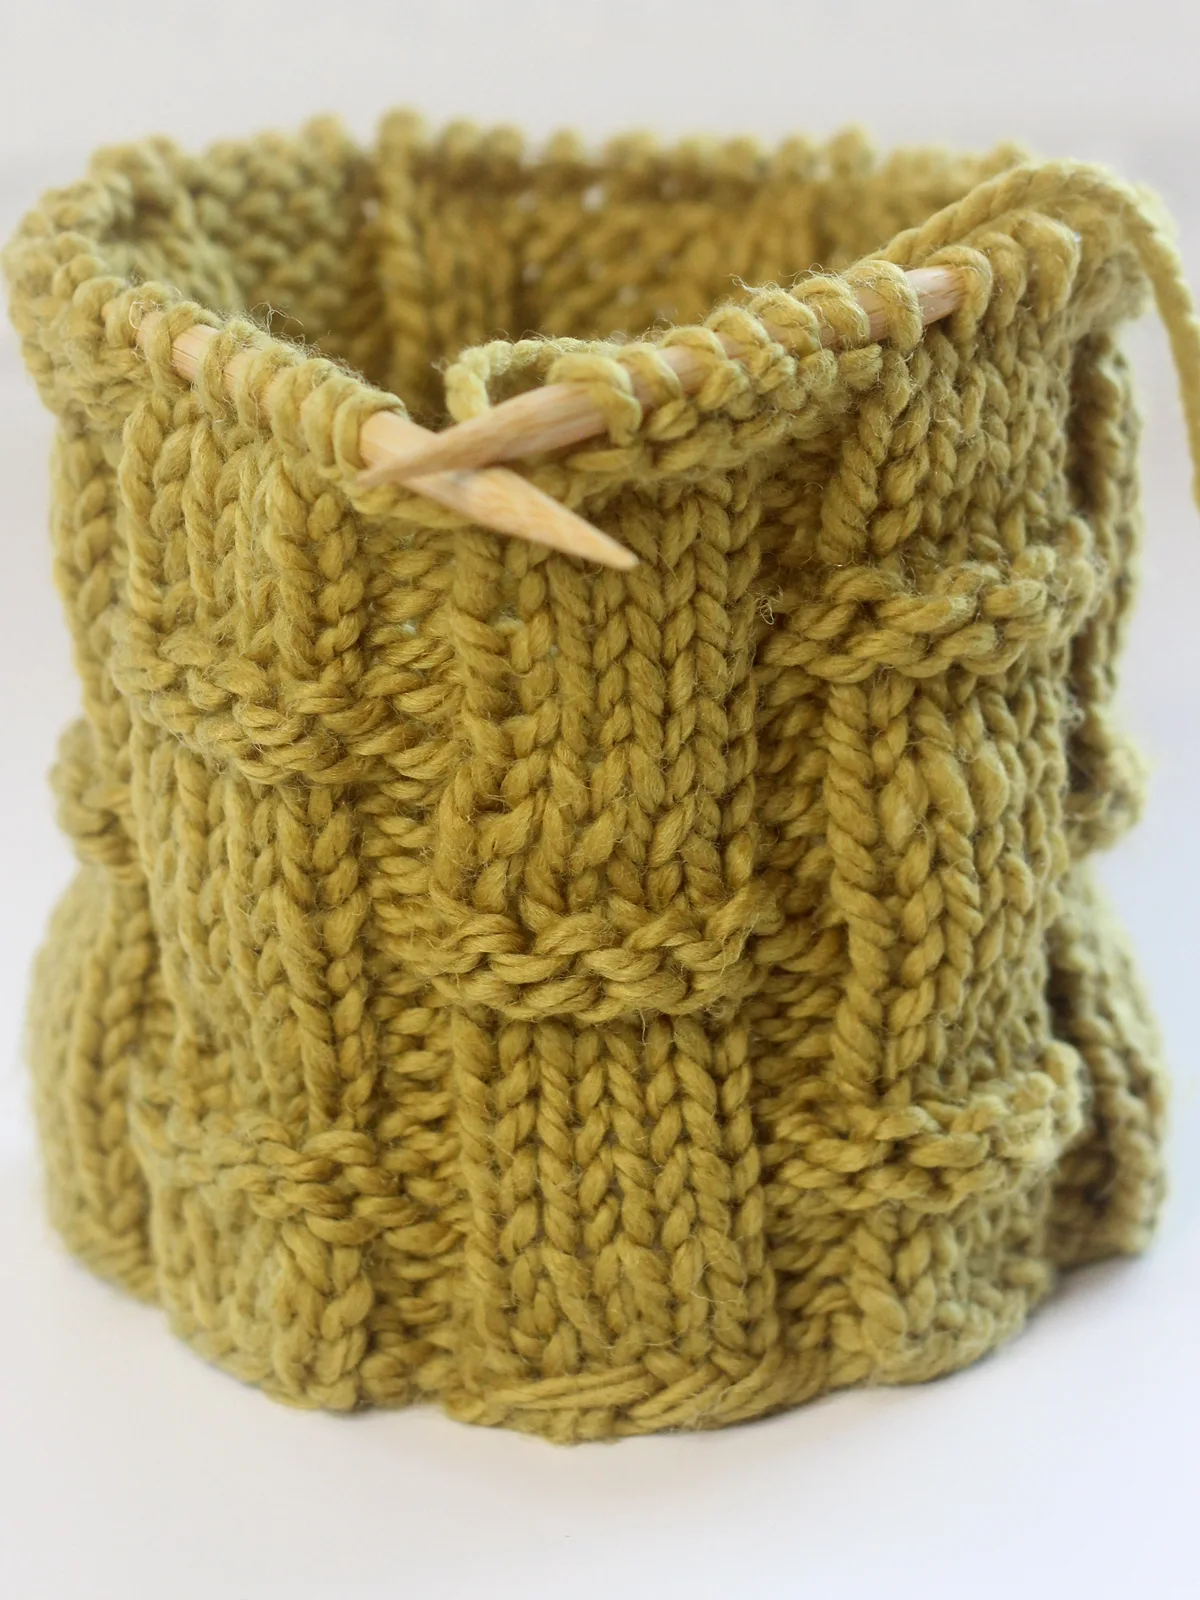 Bamboo Ribbing stitch knitted on circular needles in the round with olive green colored yarn.